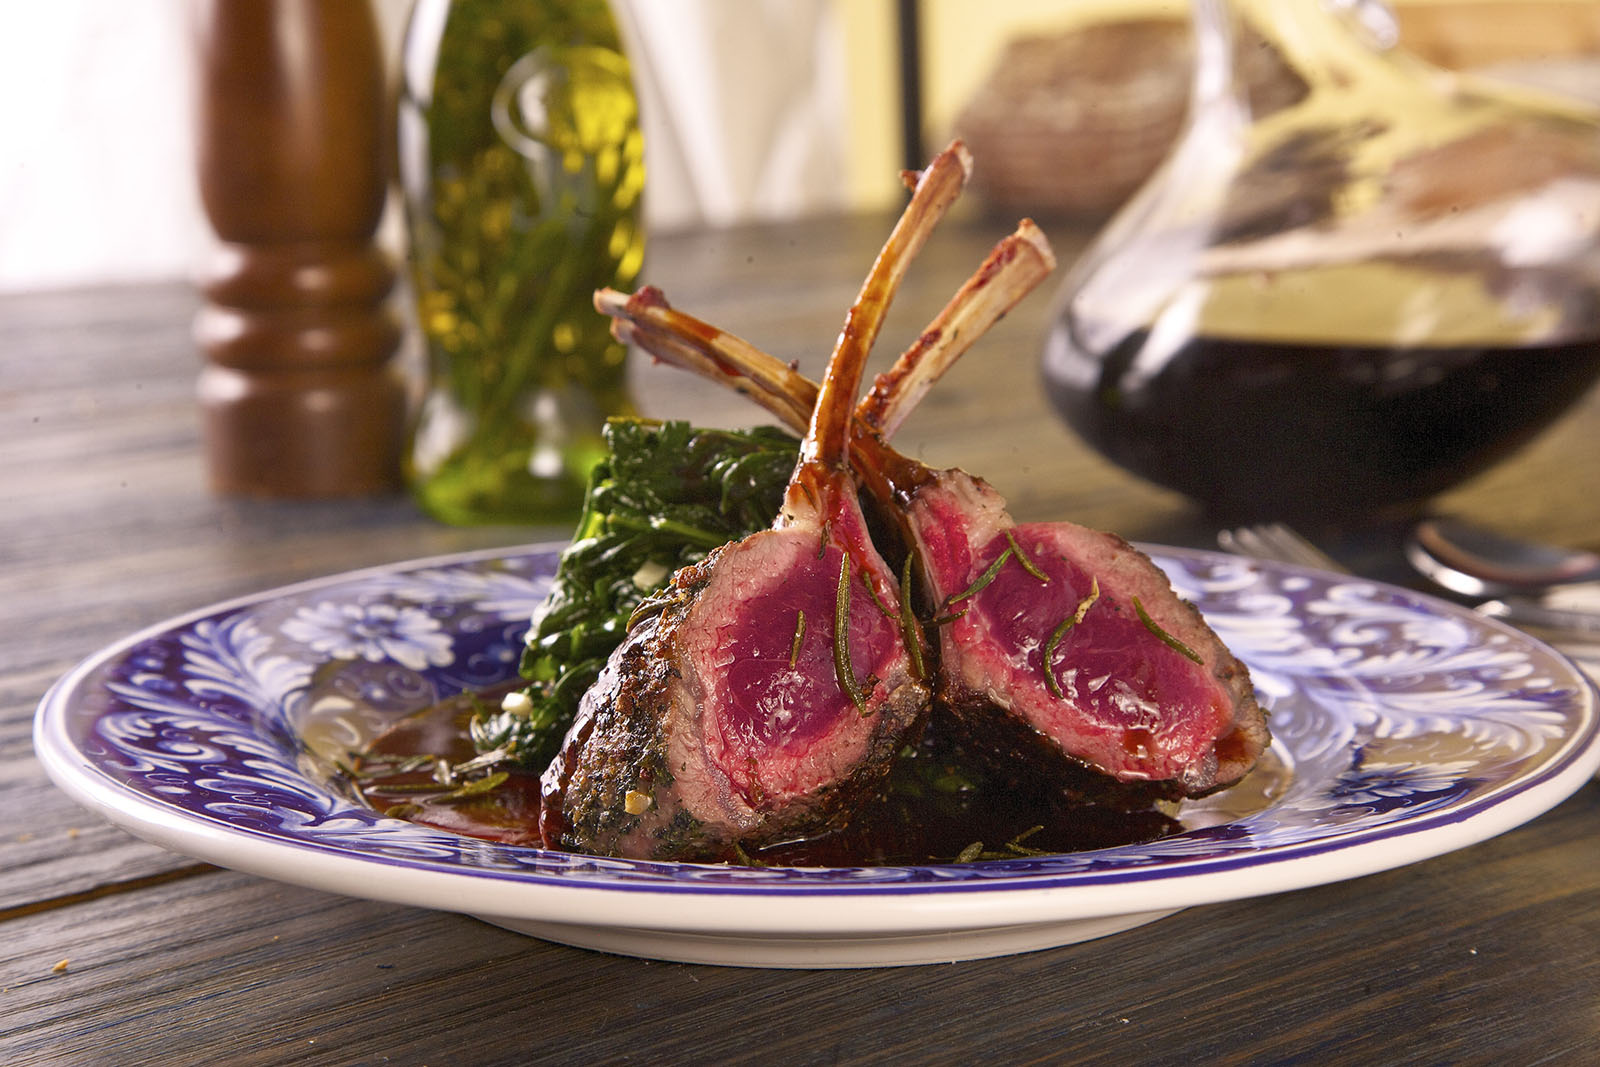 Rack of Lamb with rosemary leaves